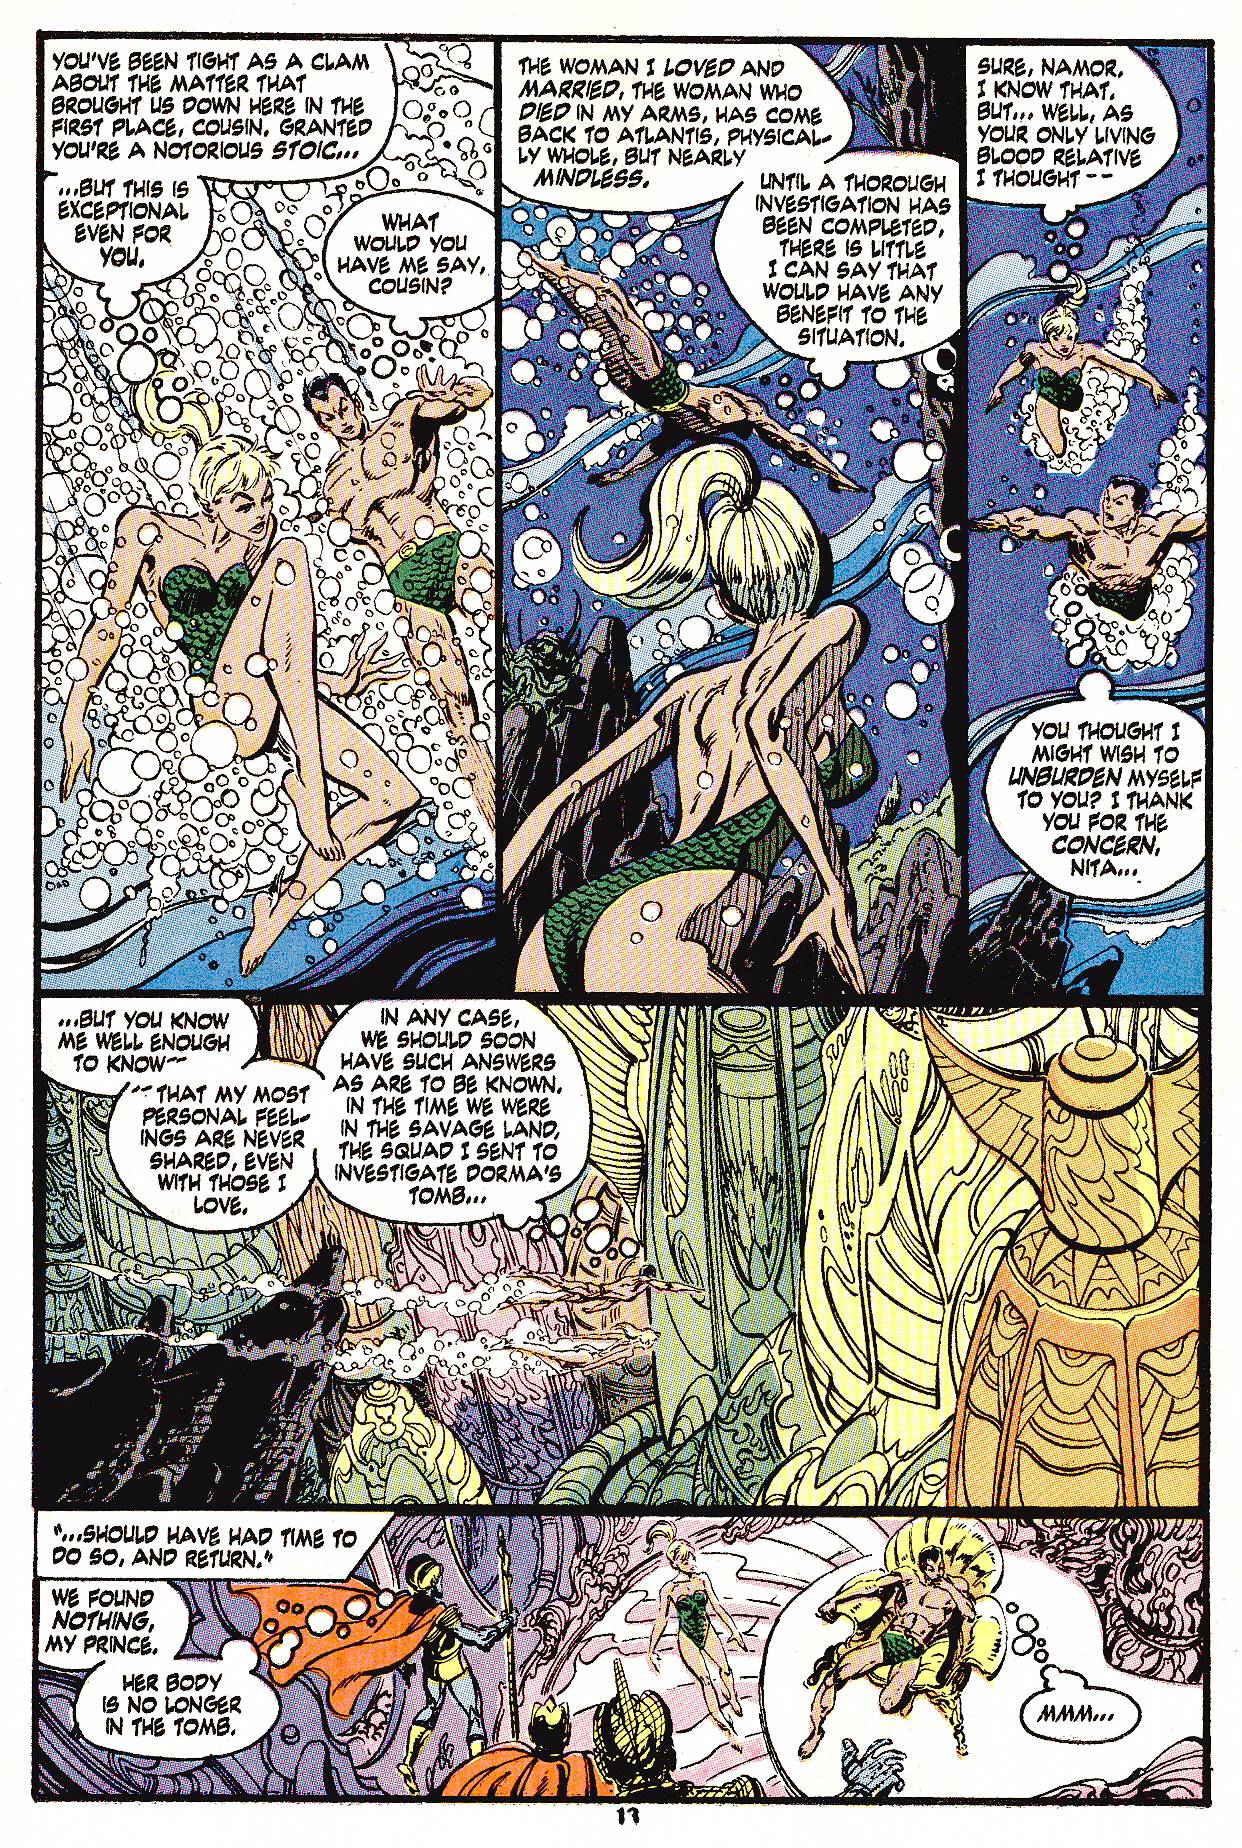 Read online Namor, The Sub-Mariner comic -  Issue #19 - 11